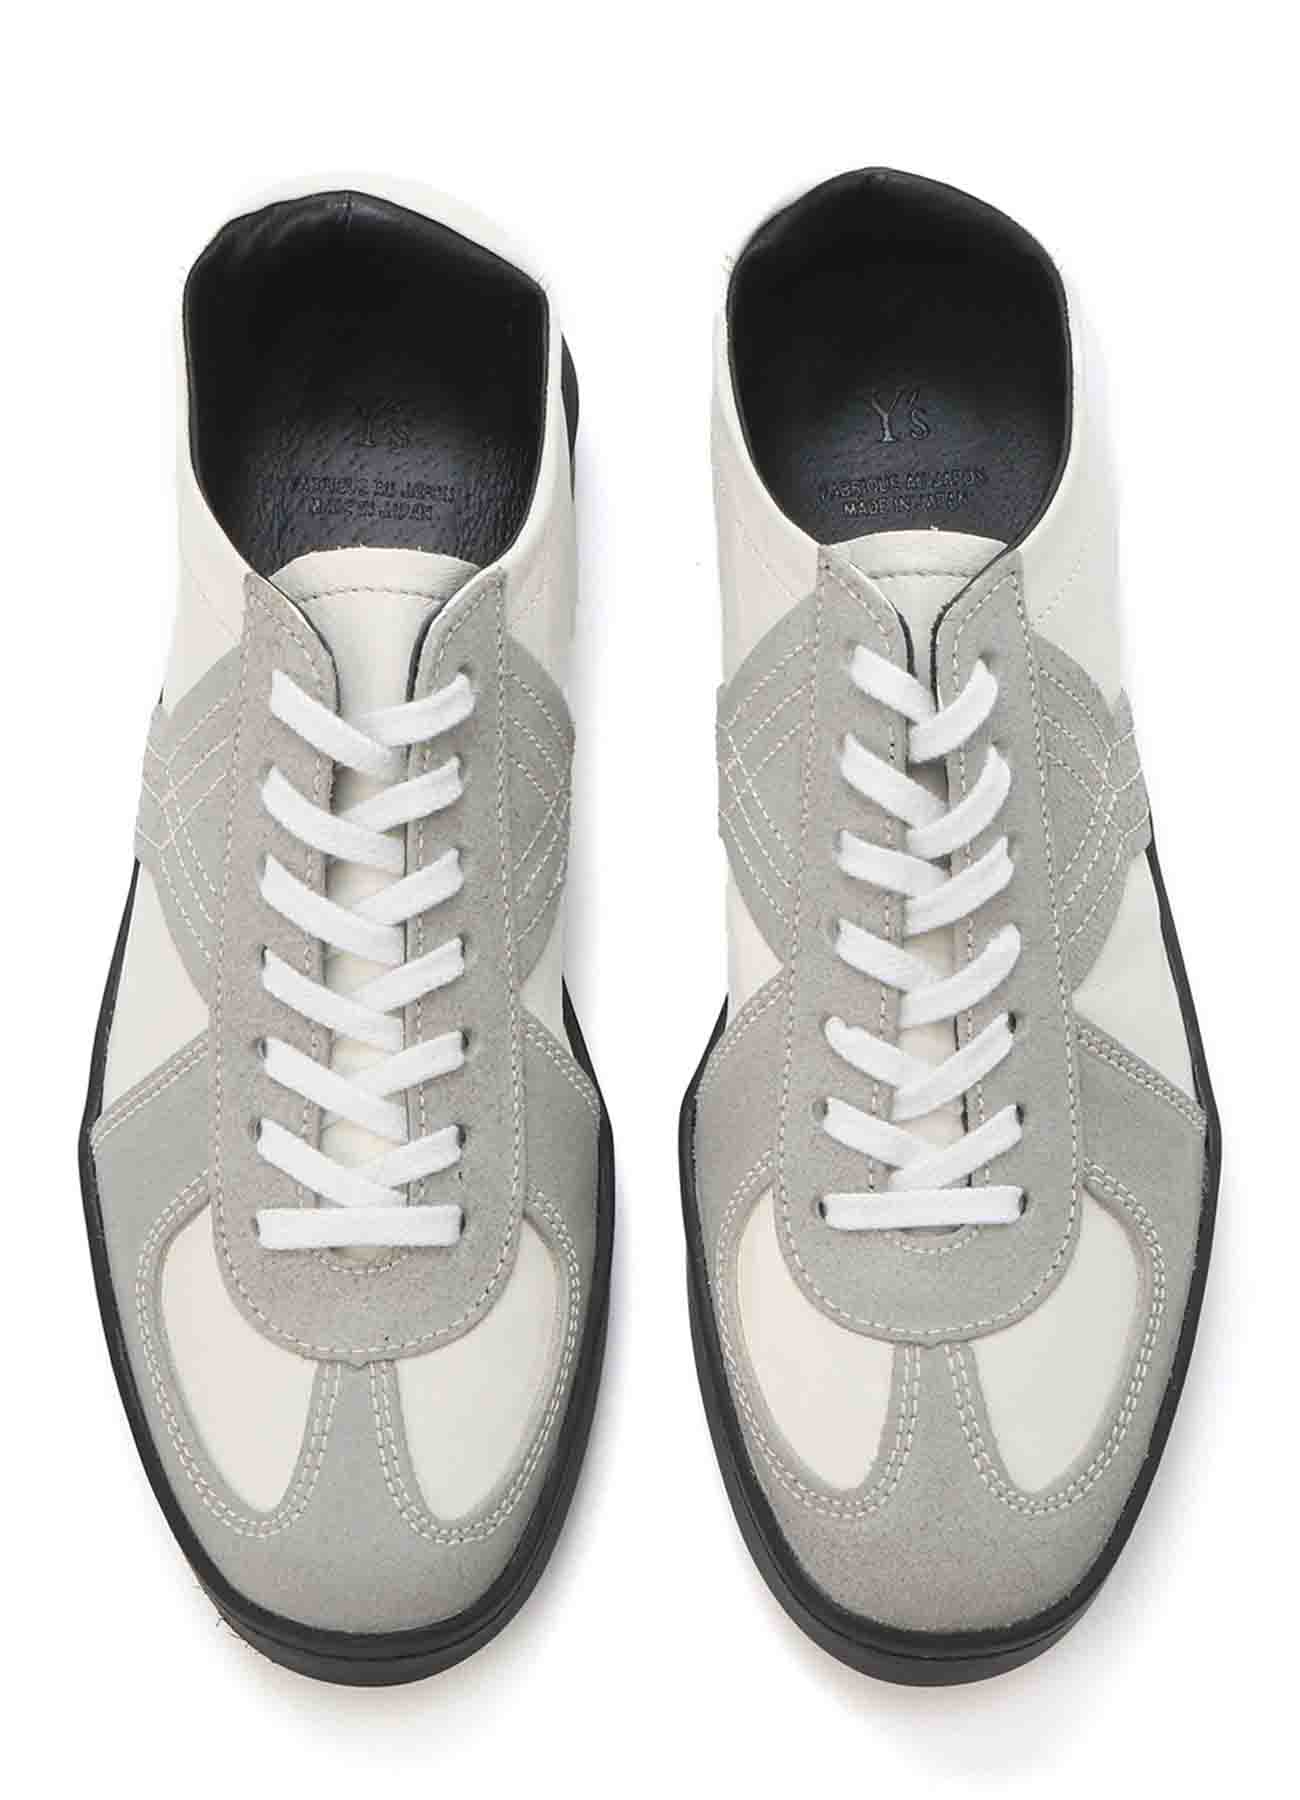 WAX VELOUR COMBINATION LEATHER GERMAN TRAINER